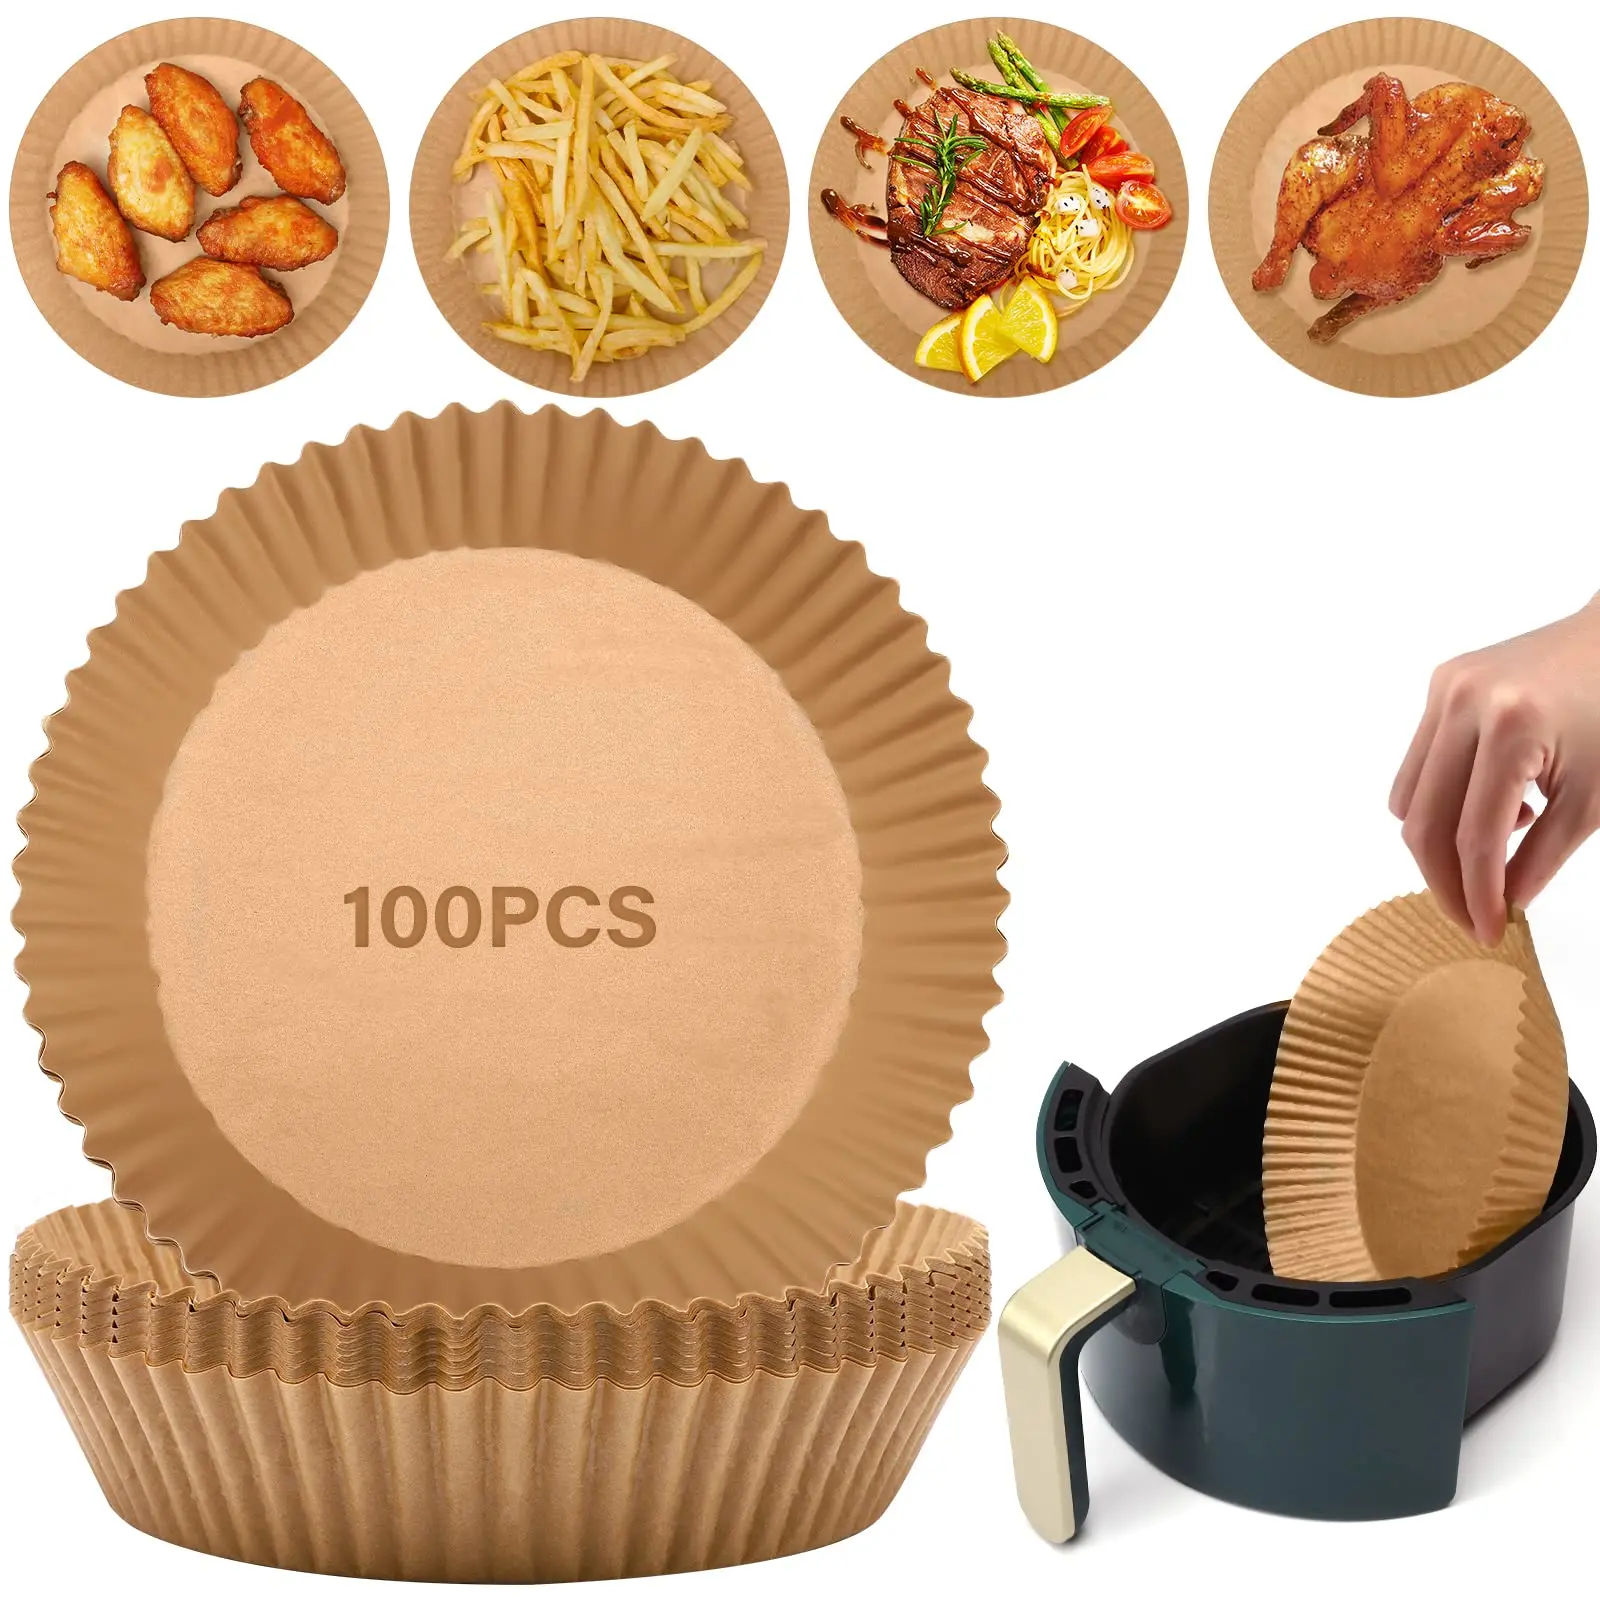 

100 Pcs Air Fryer Disposable Paper Liner, Food Grade Parchment Paper Air Fryer Liners Round for Baking Roasting Microwave